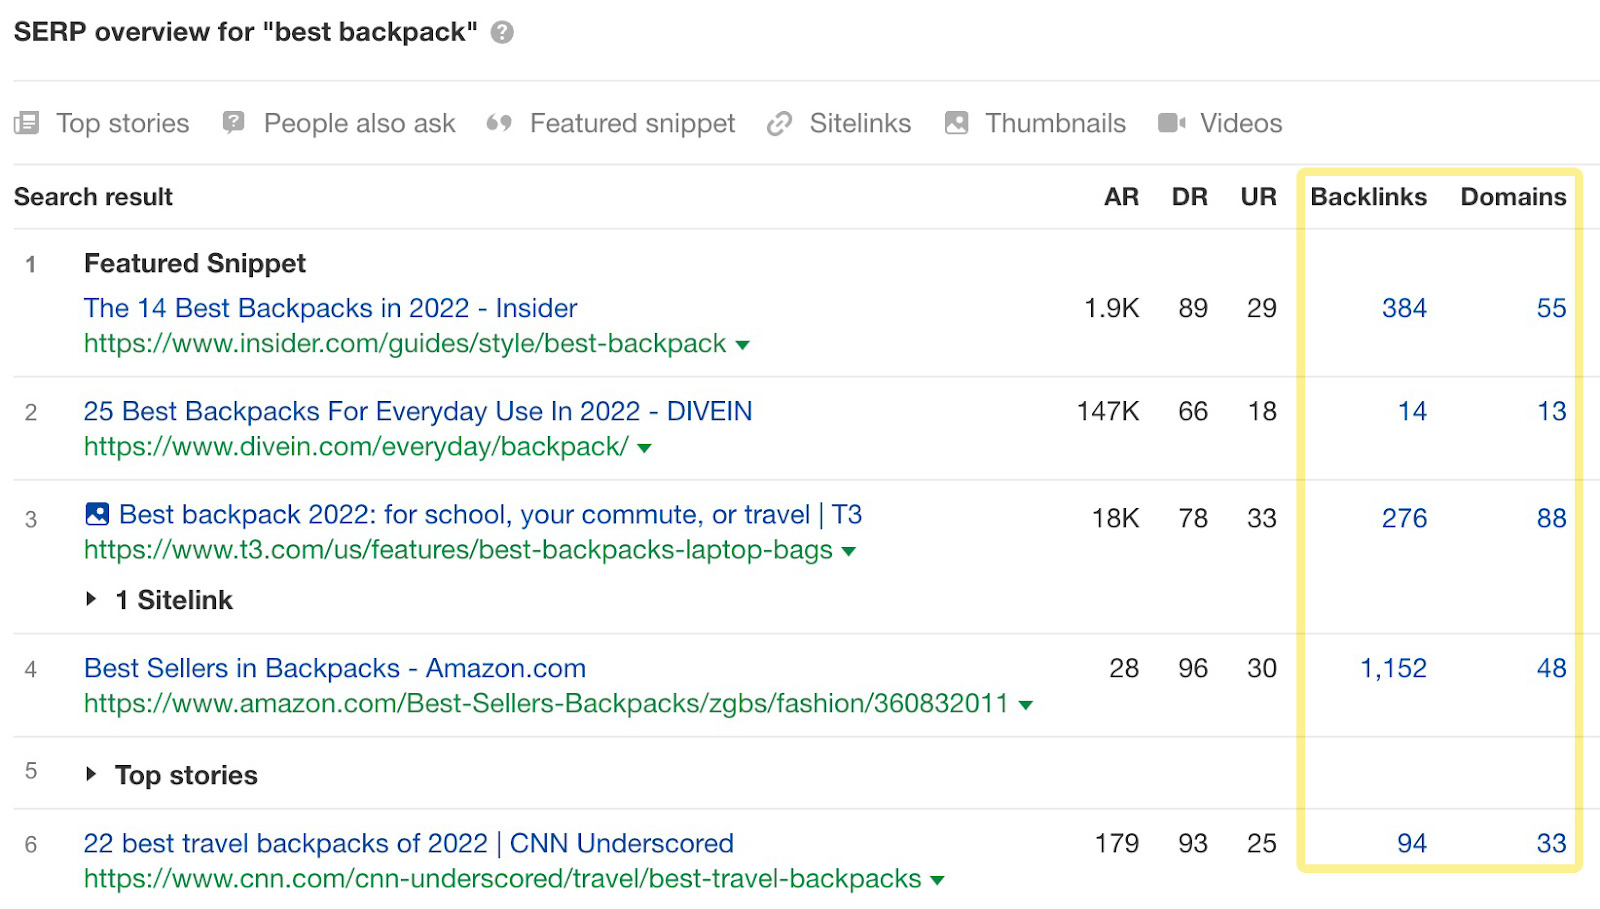 SERP overview for "best backpack" 